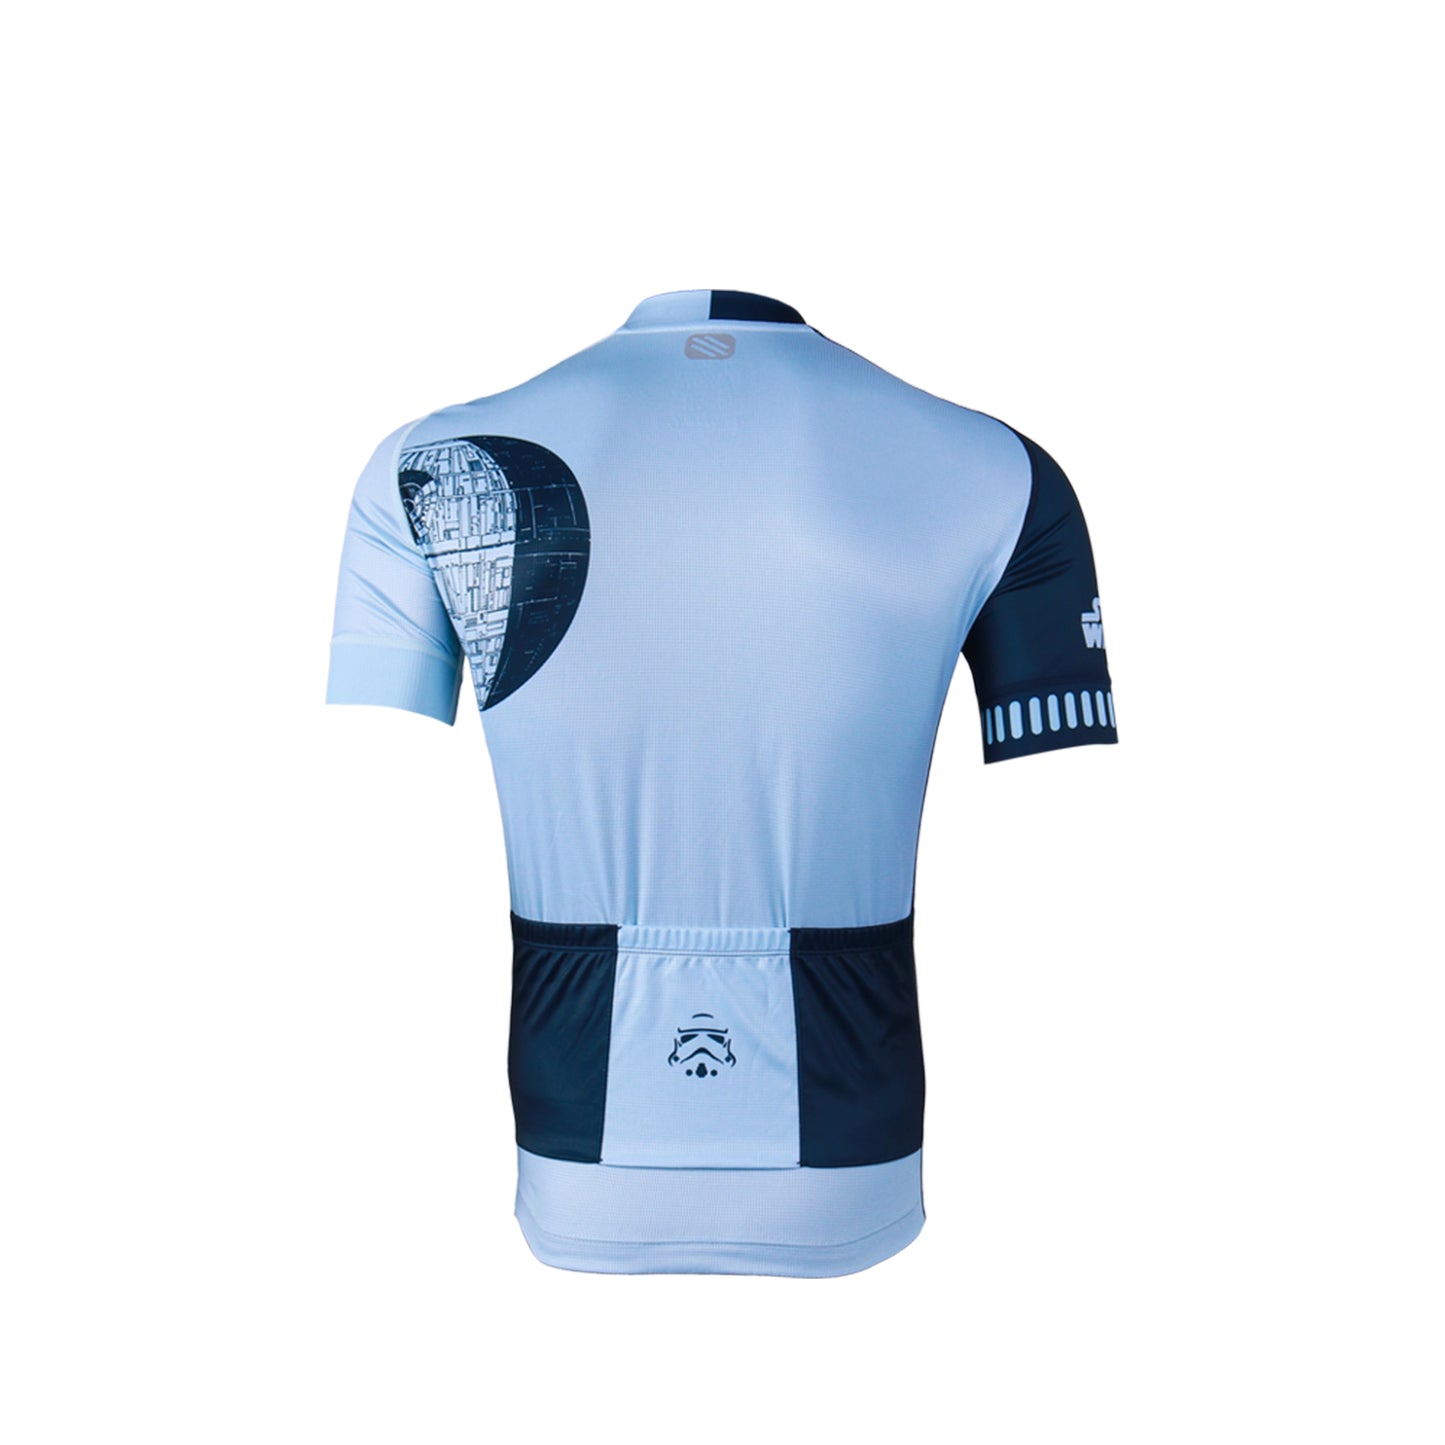 Rudy Project Star Wars Storm Trooper Death Star Cycling Jersey - Navy/Light Blue